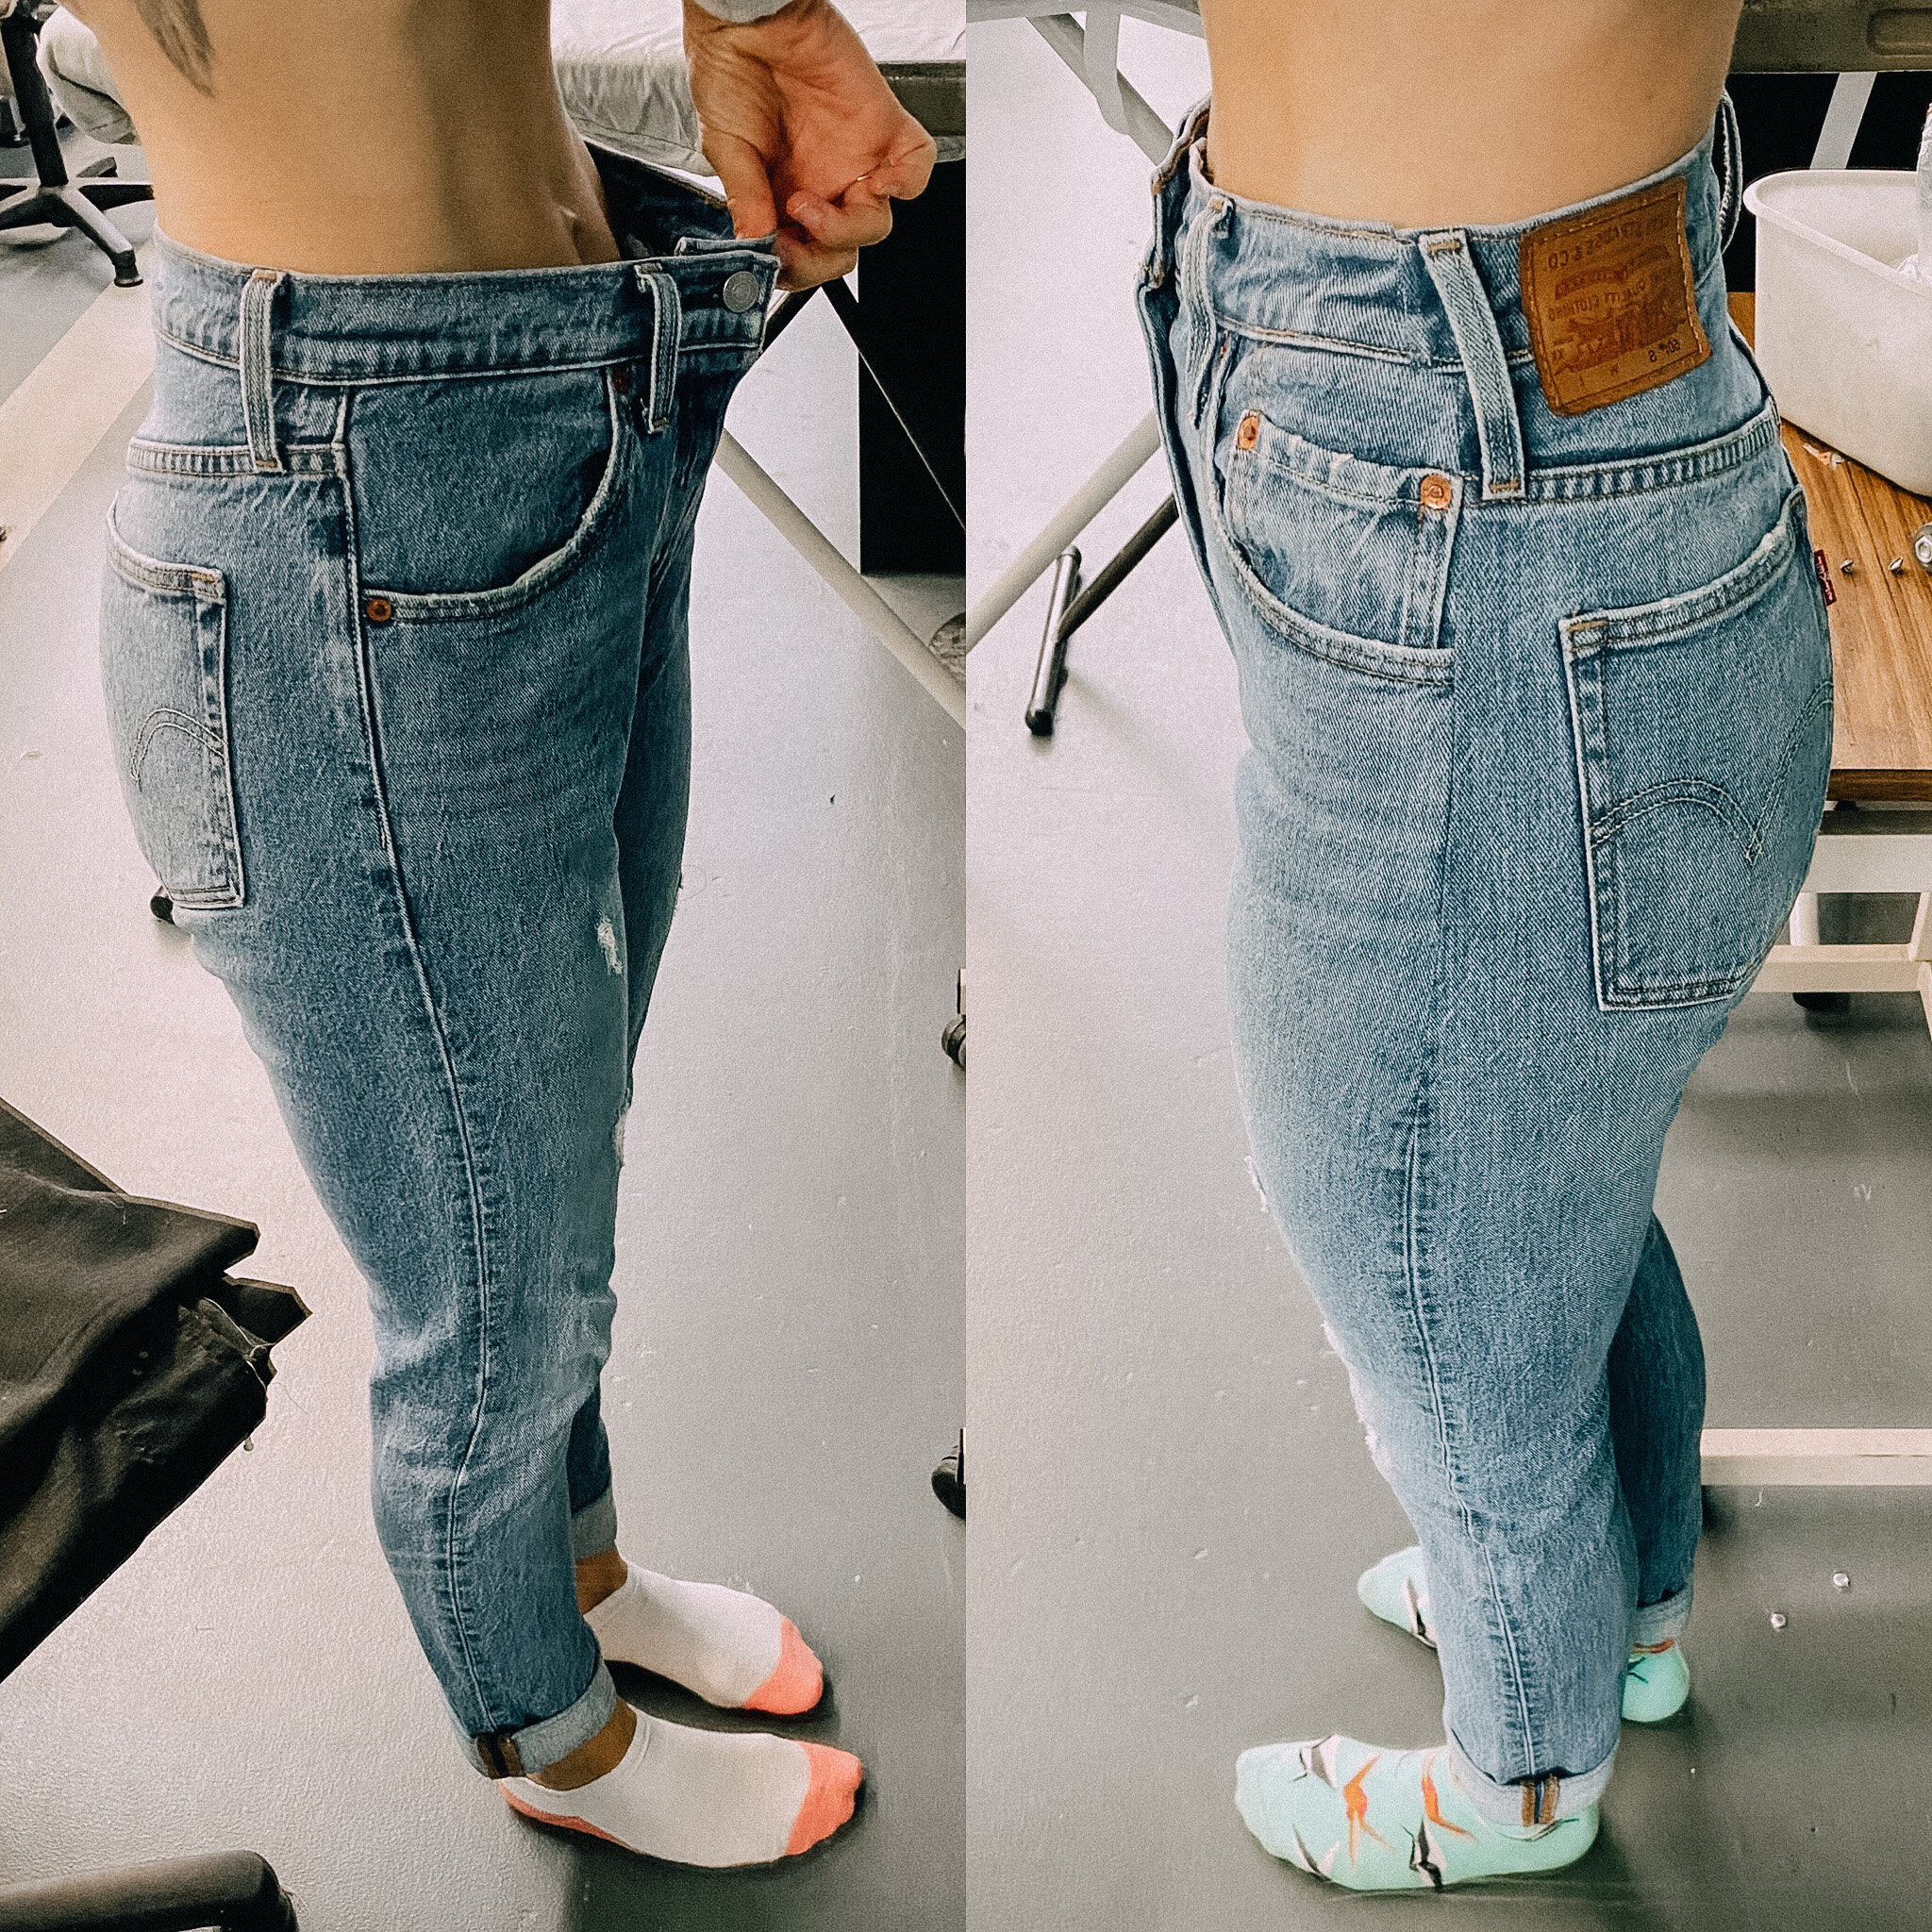 Jeans Alteration: How to size down Denim at waist — Sewing Patterns by Masin